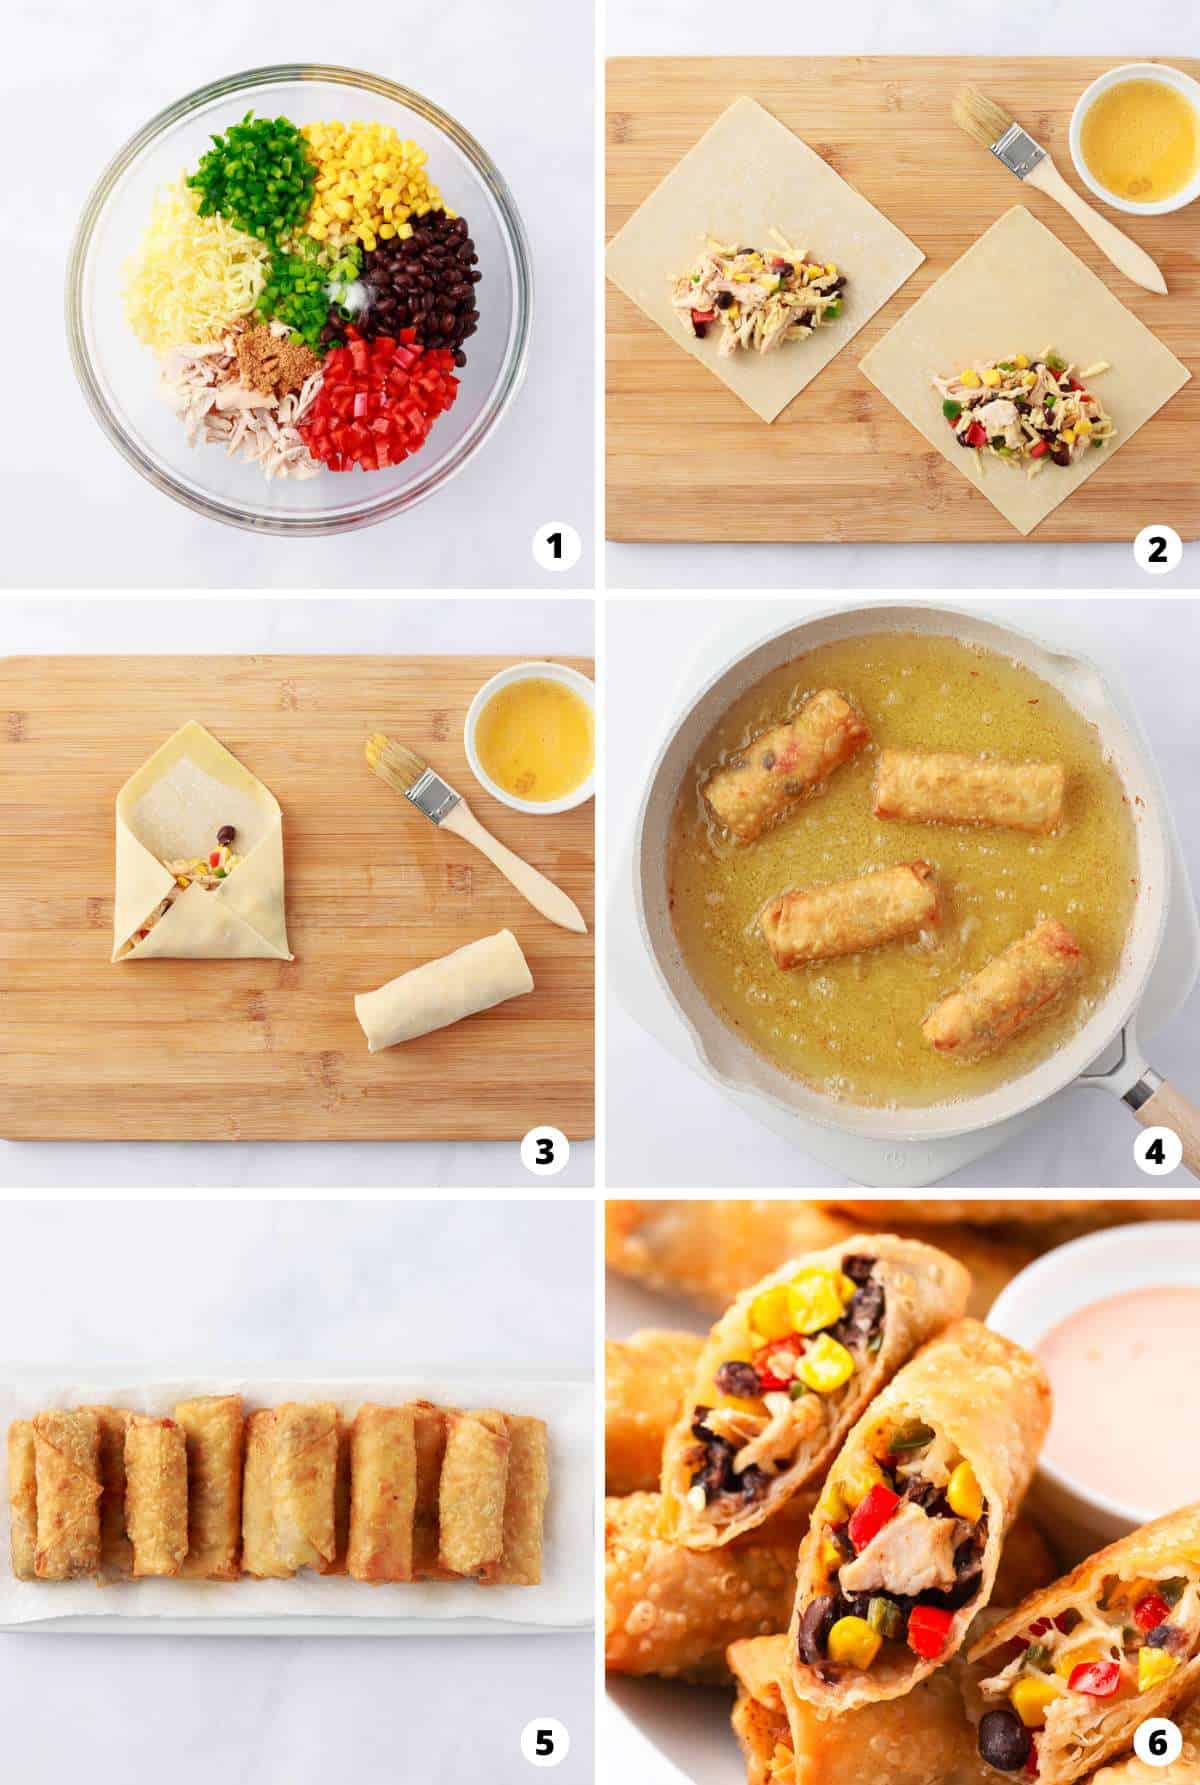 Showing how to make southwest egg rolls in a 6 step collage.